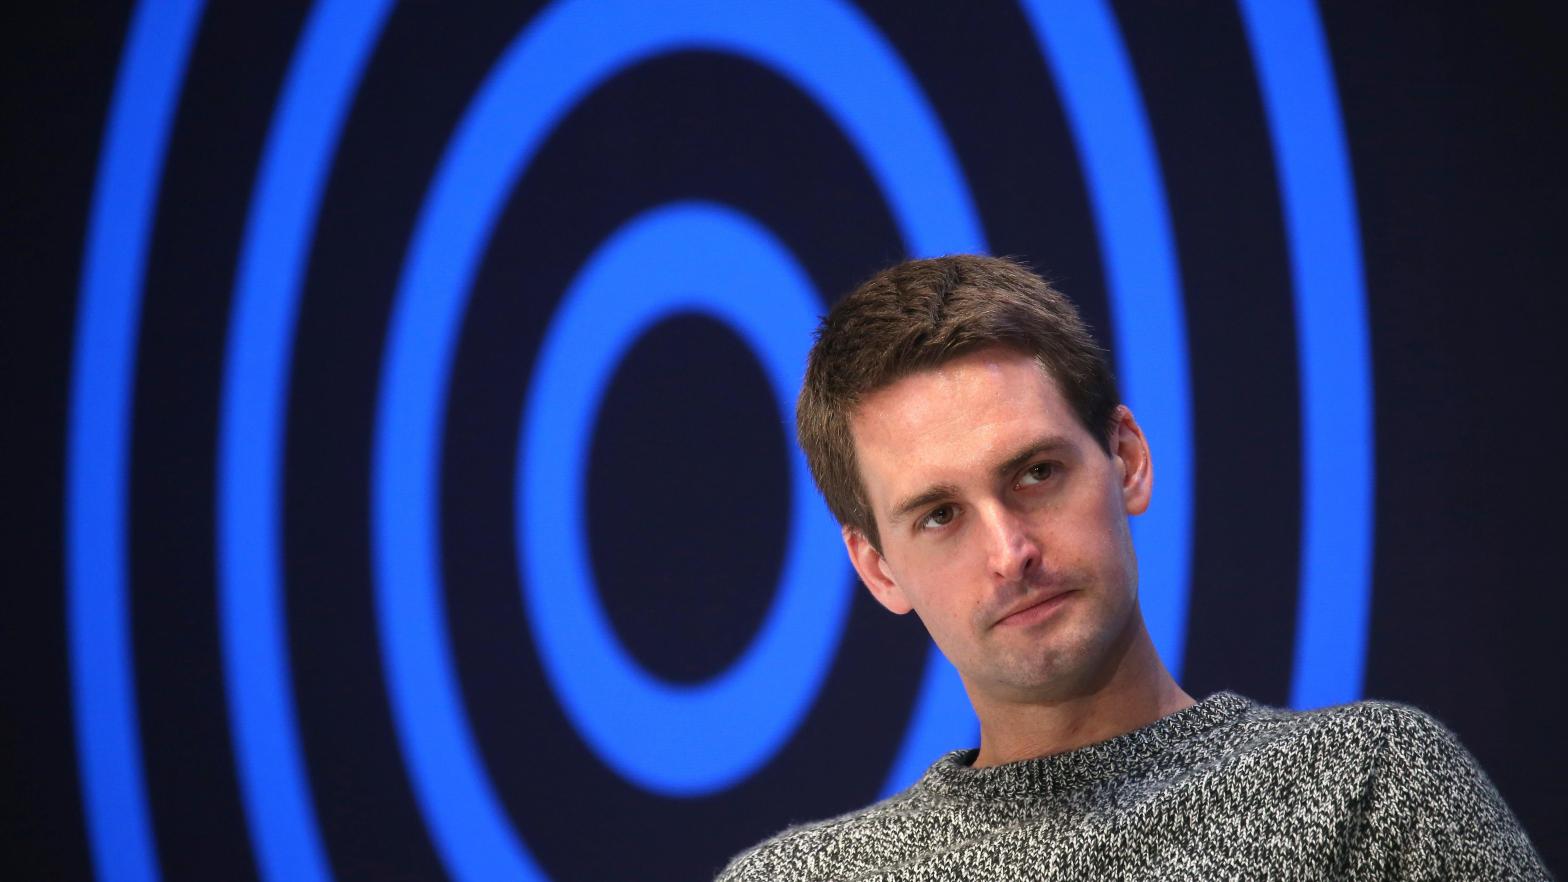 Snap Founder and CEO Evan Spiegel warned investors that the company would not be making its expected revenues this year. (Photo: Karl-Josef Hildenbrand, AP)